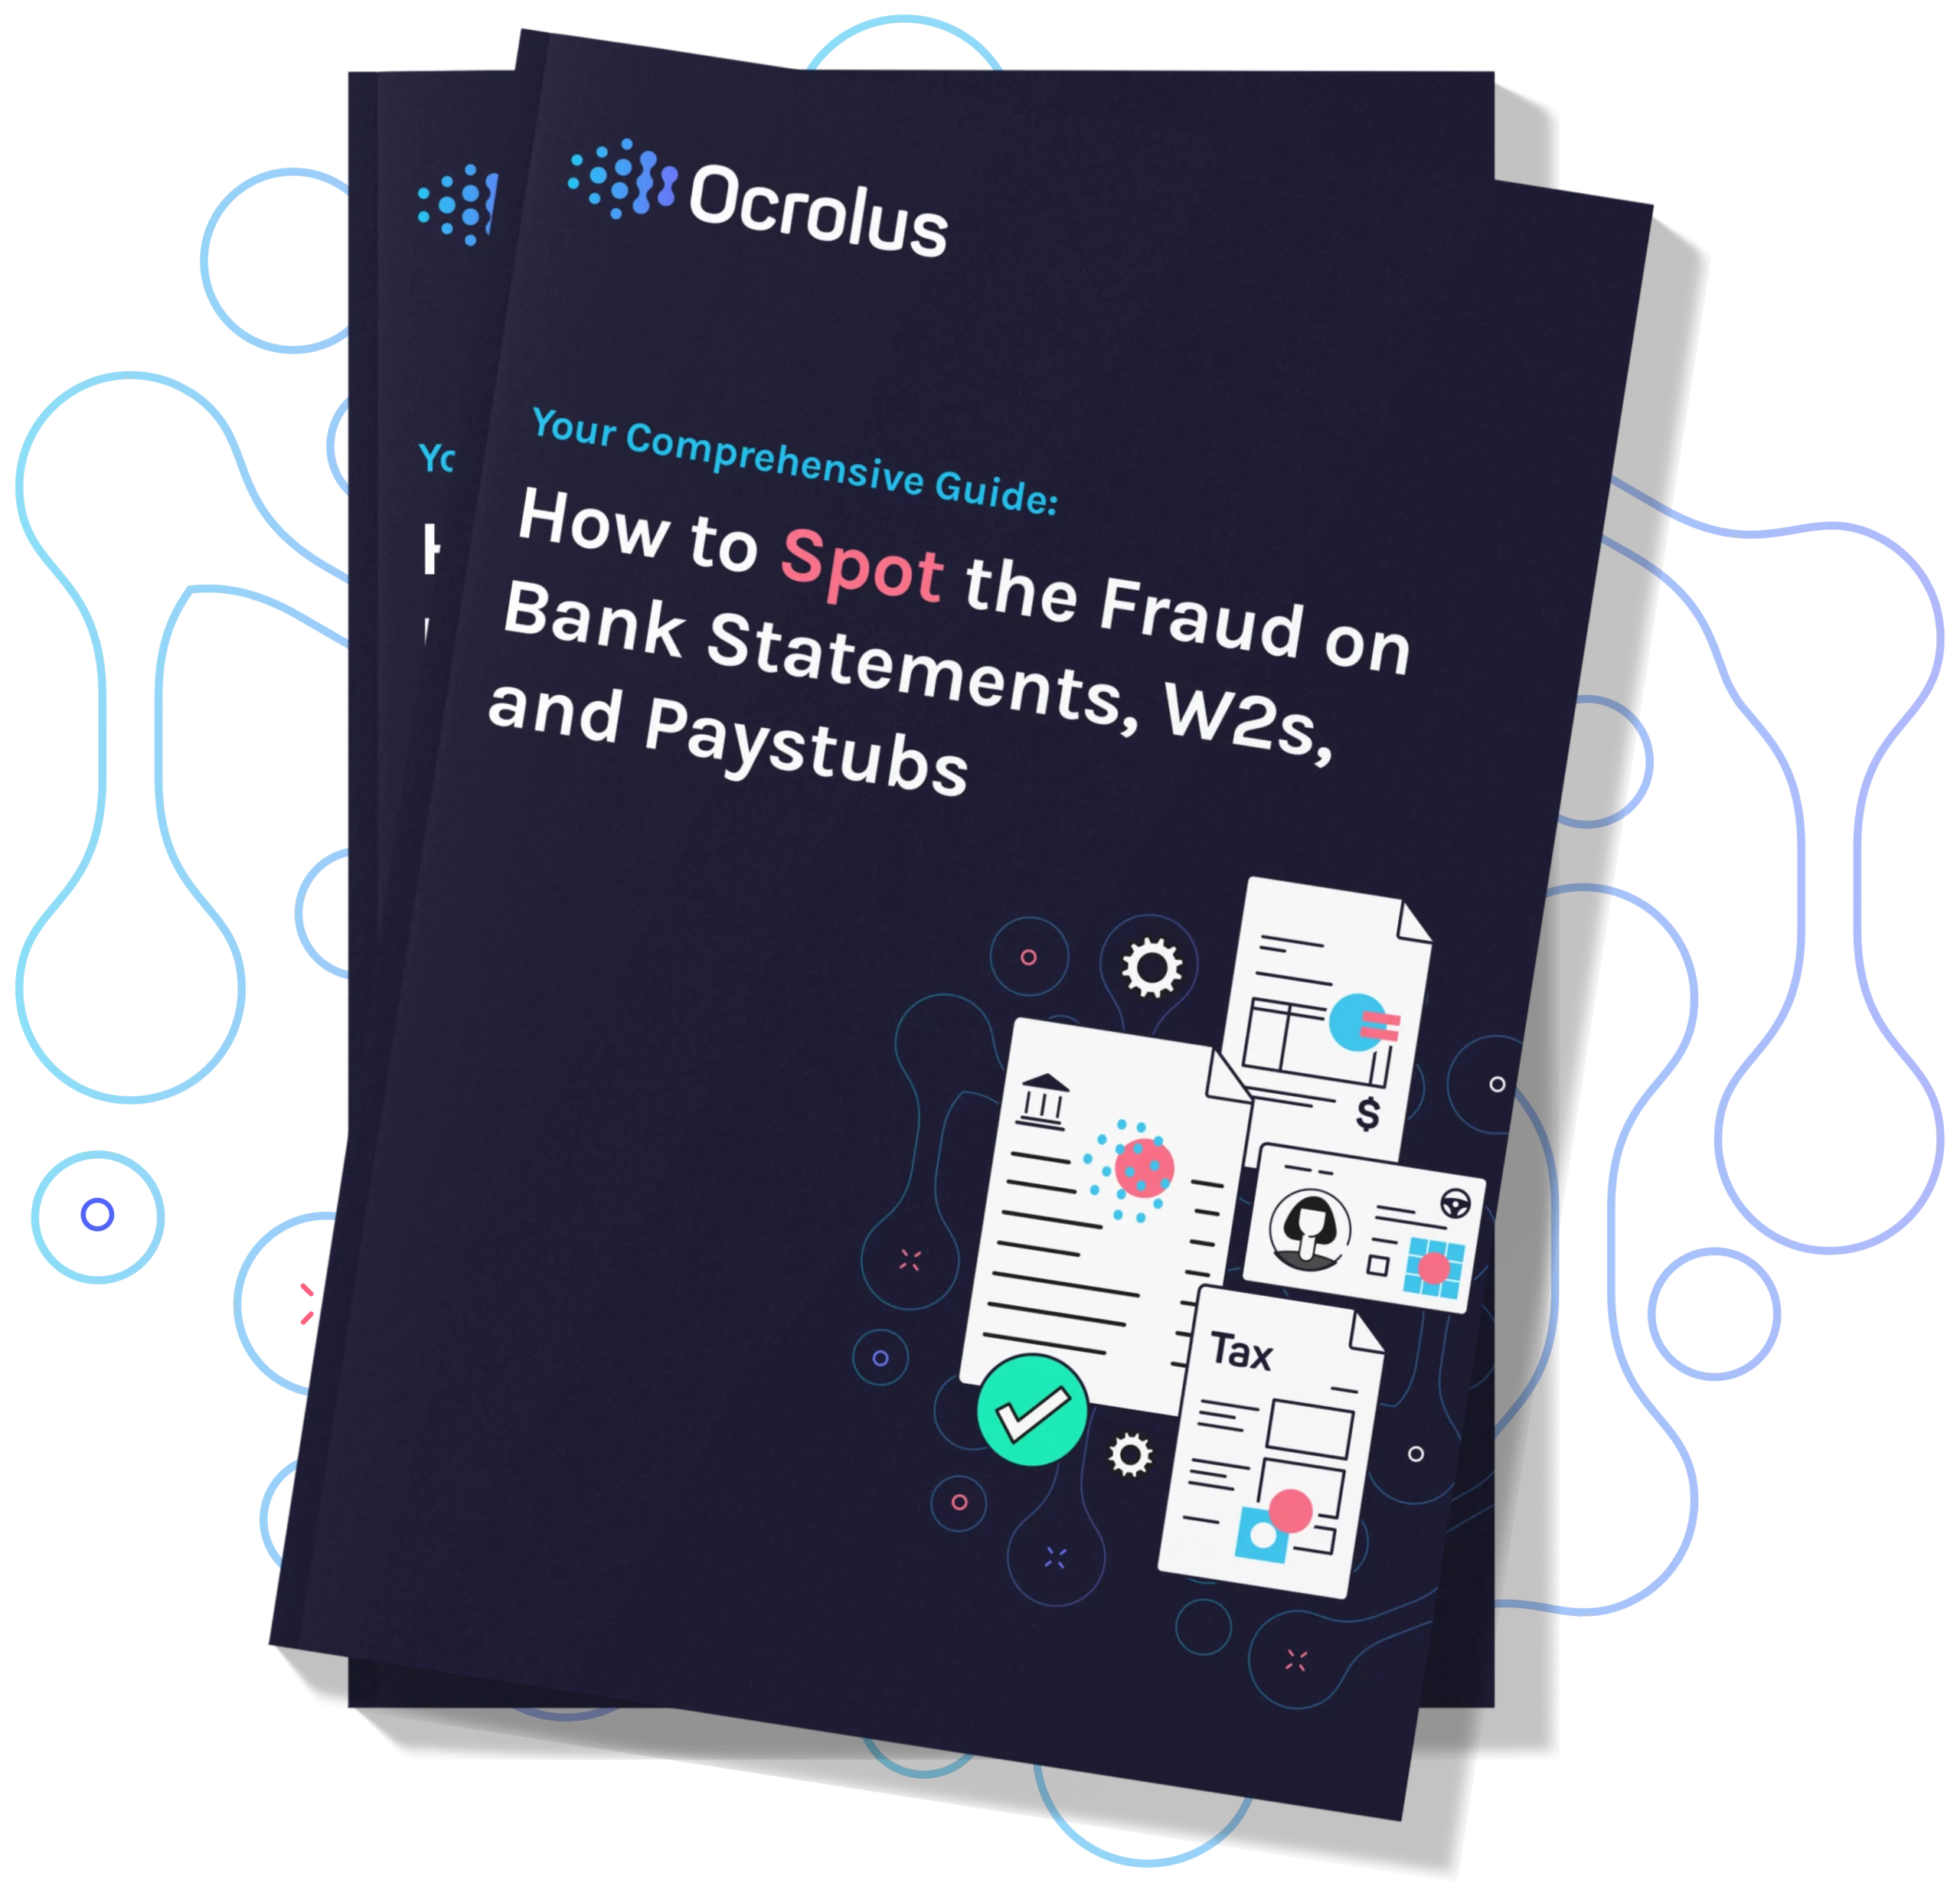 How to Spot the Fraud on Bank Statements, W2s, and Paystubs